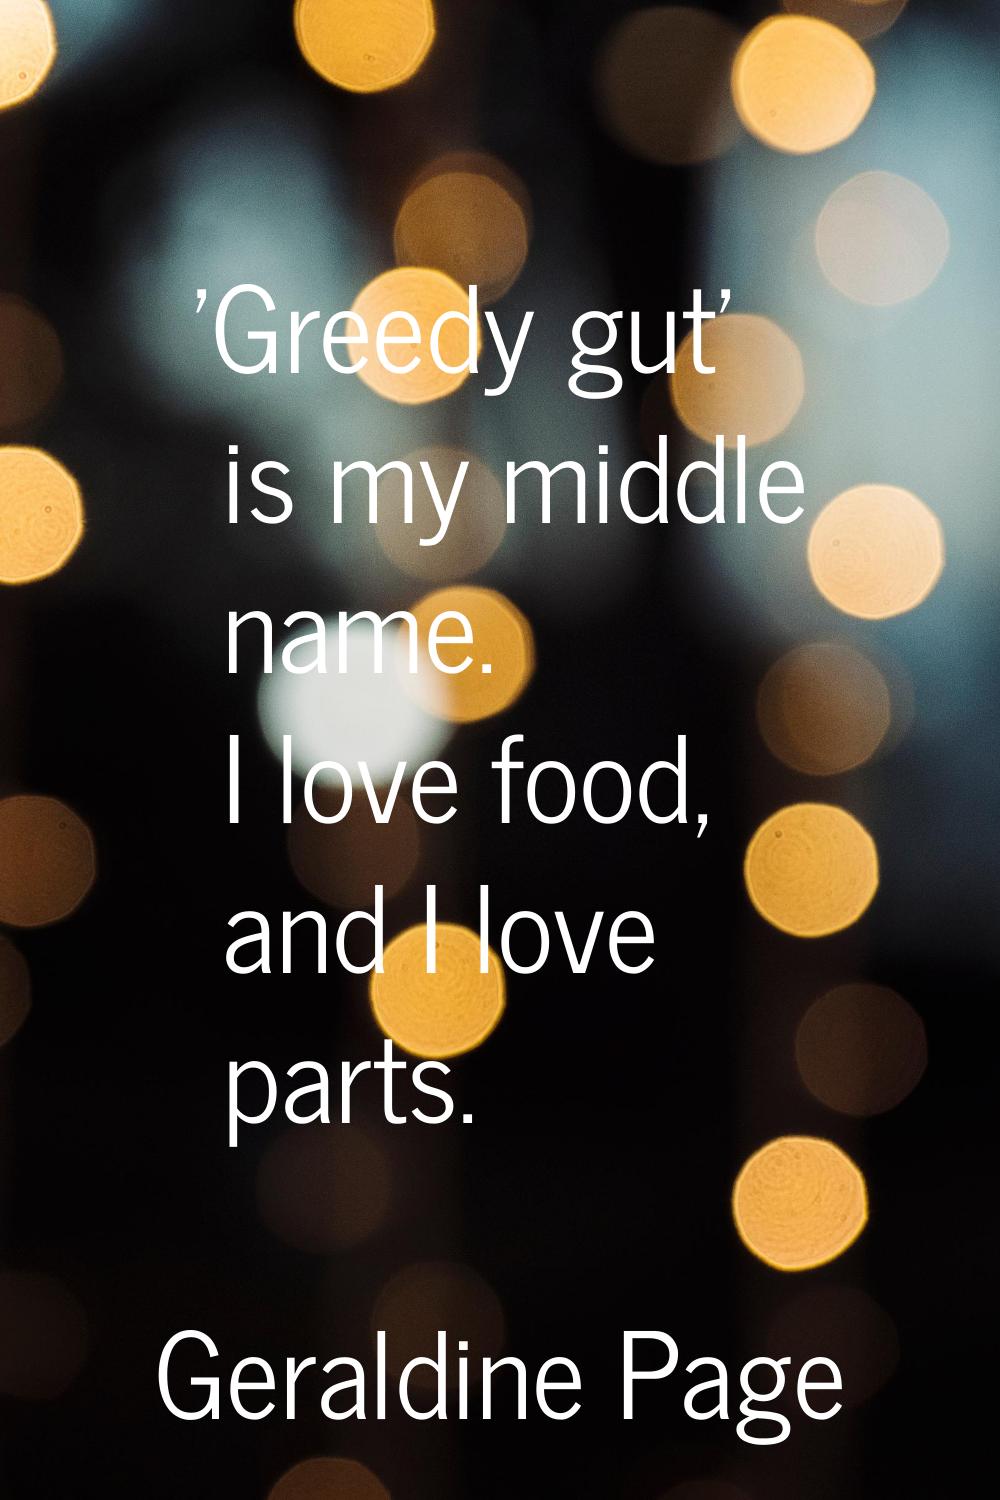 'Greedy gut' is my middle name. I love food, and I love parts.